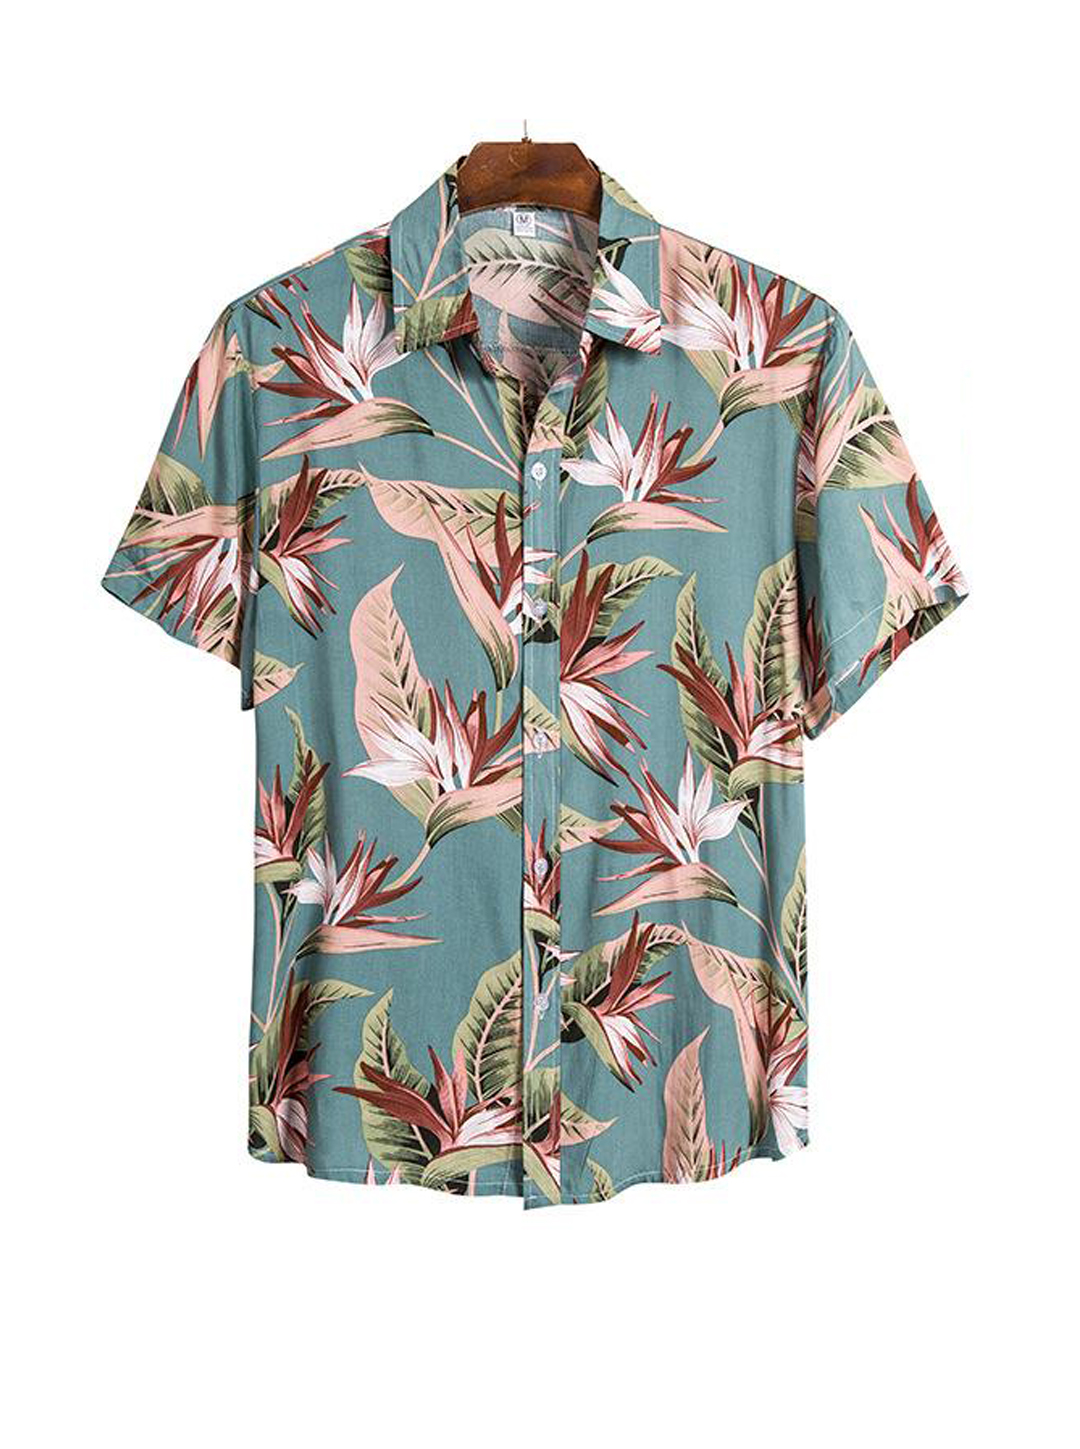 Posey Floral Printed Short Sleeve Shirts 